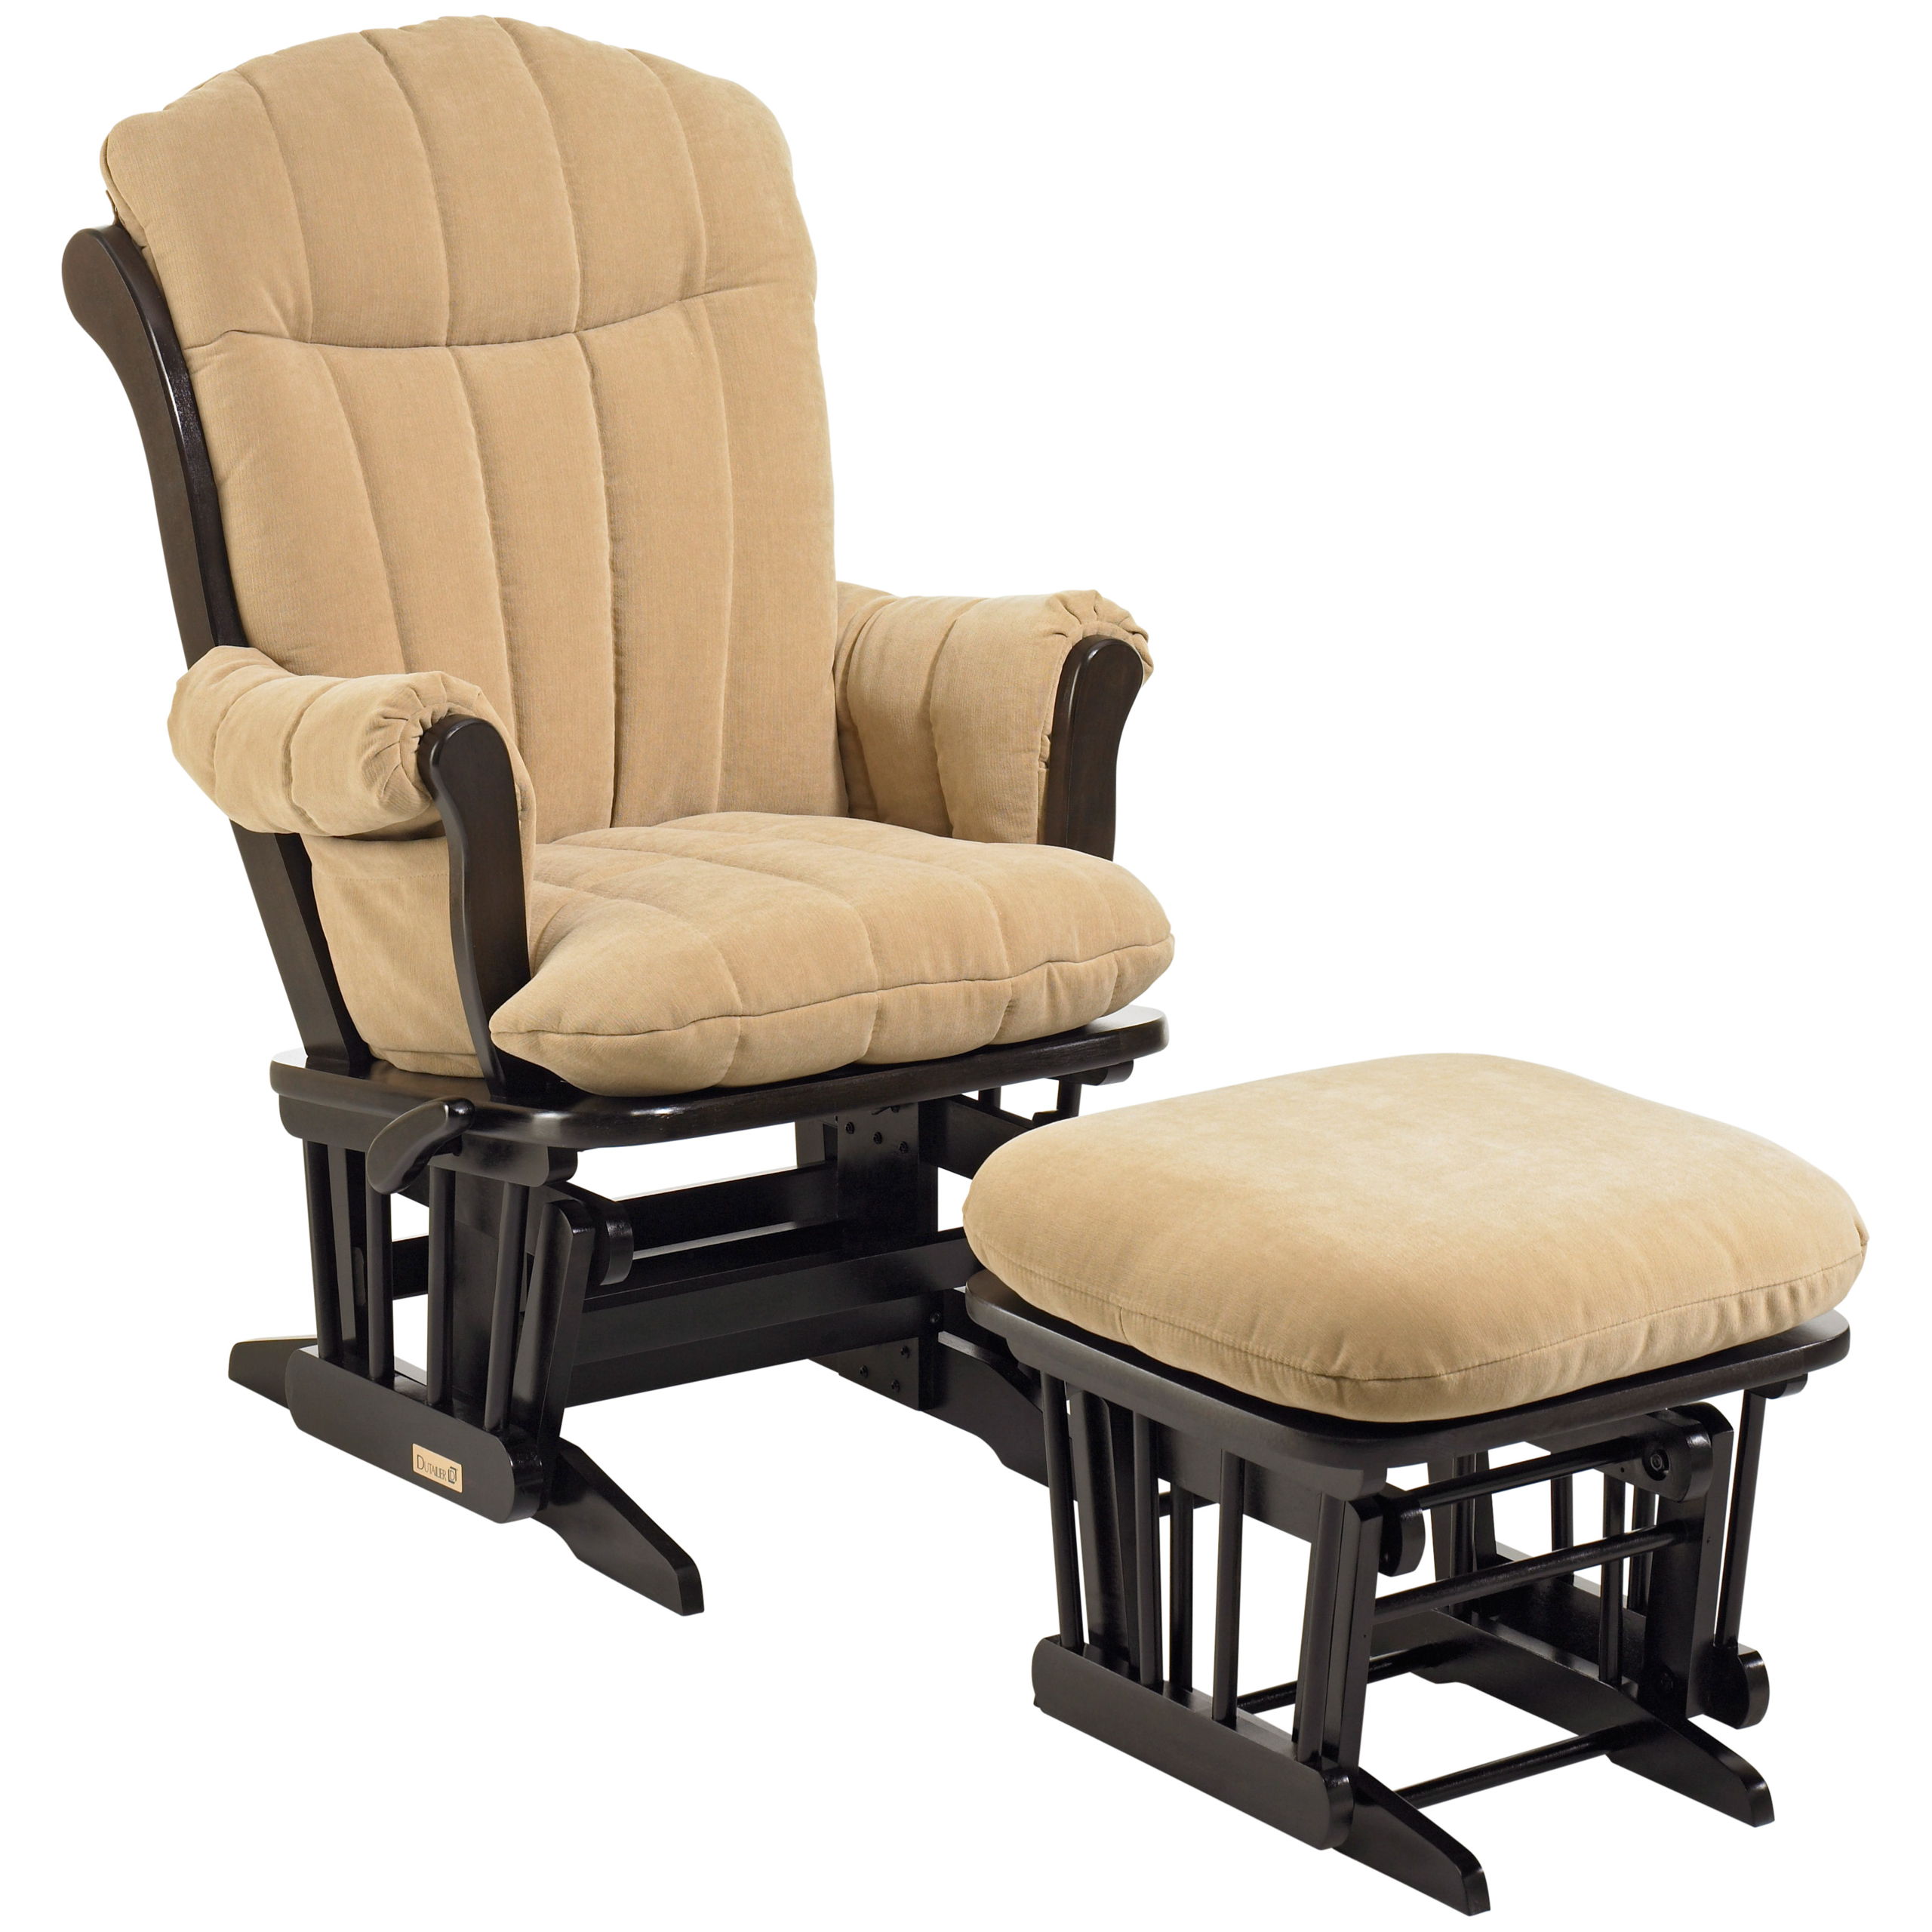 Glider Rocker Replacement Cushions You Ll Love In 2021 Visualhunt